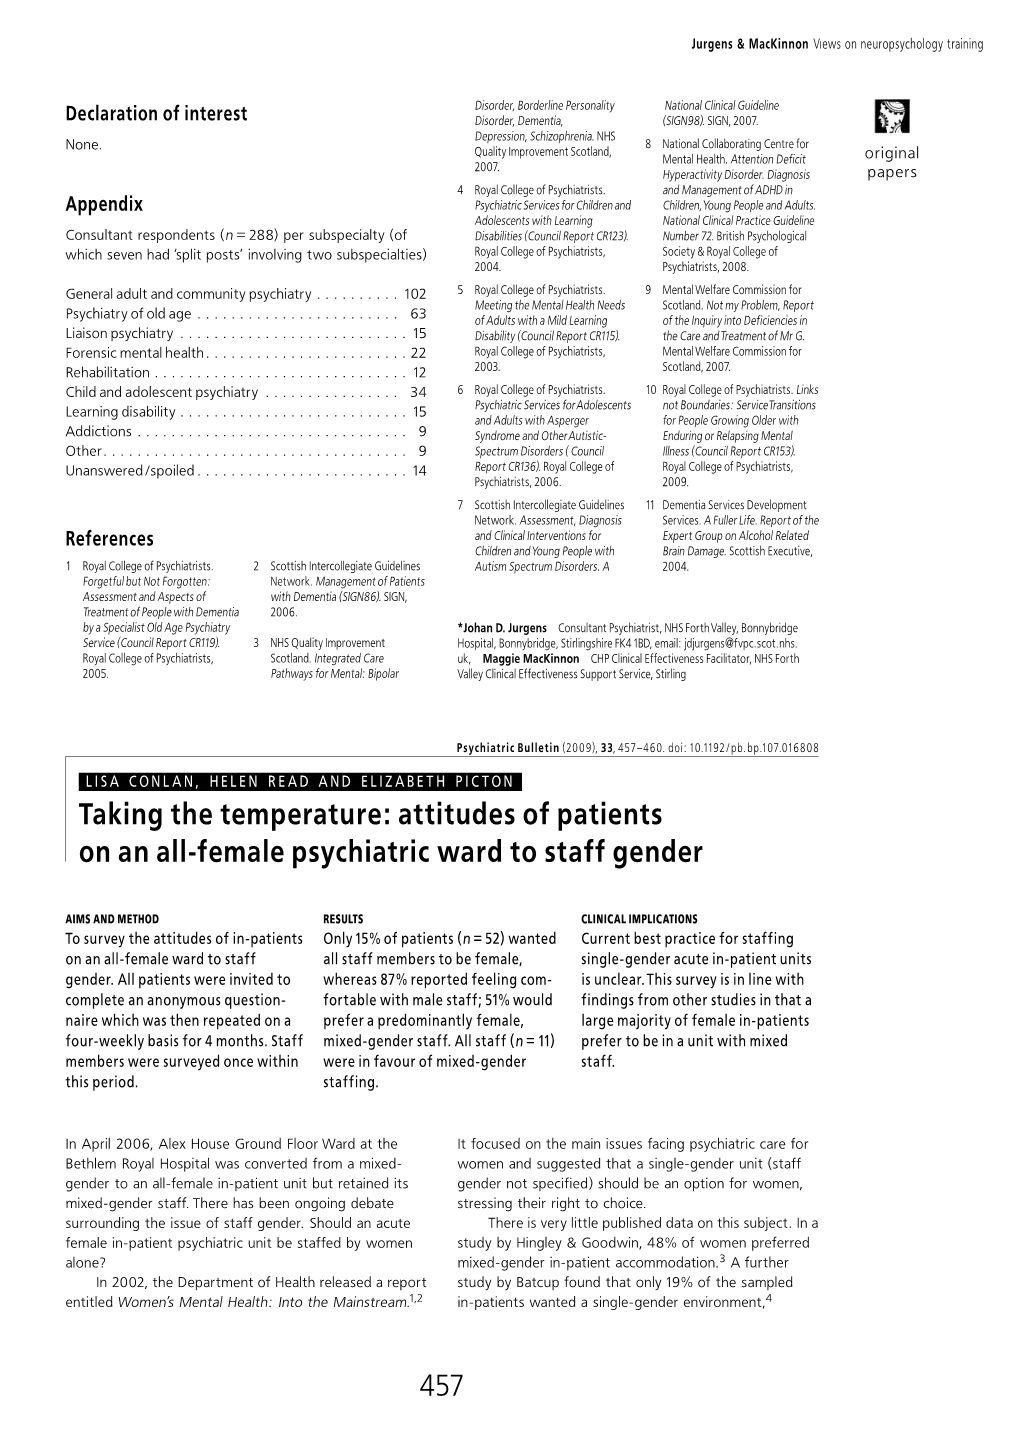 Taking the Temperature: Attitudes of Patients on an All-Female Psychiatric Ward to Staff Gender